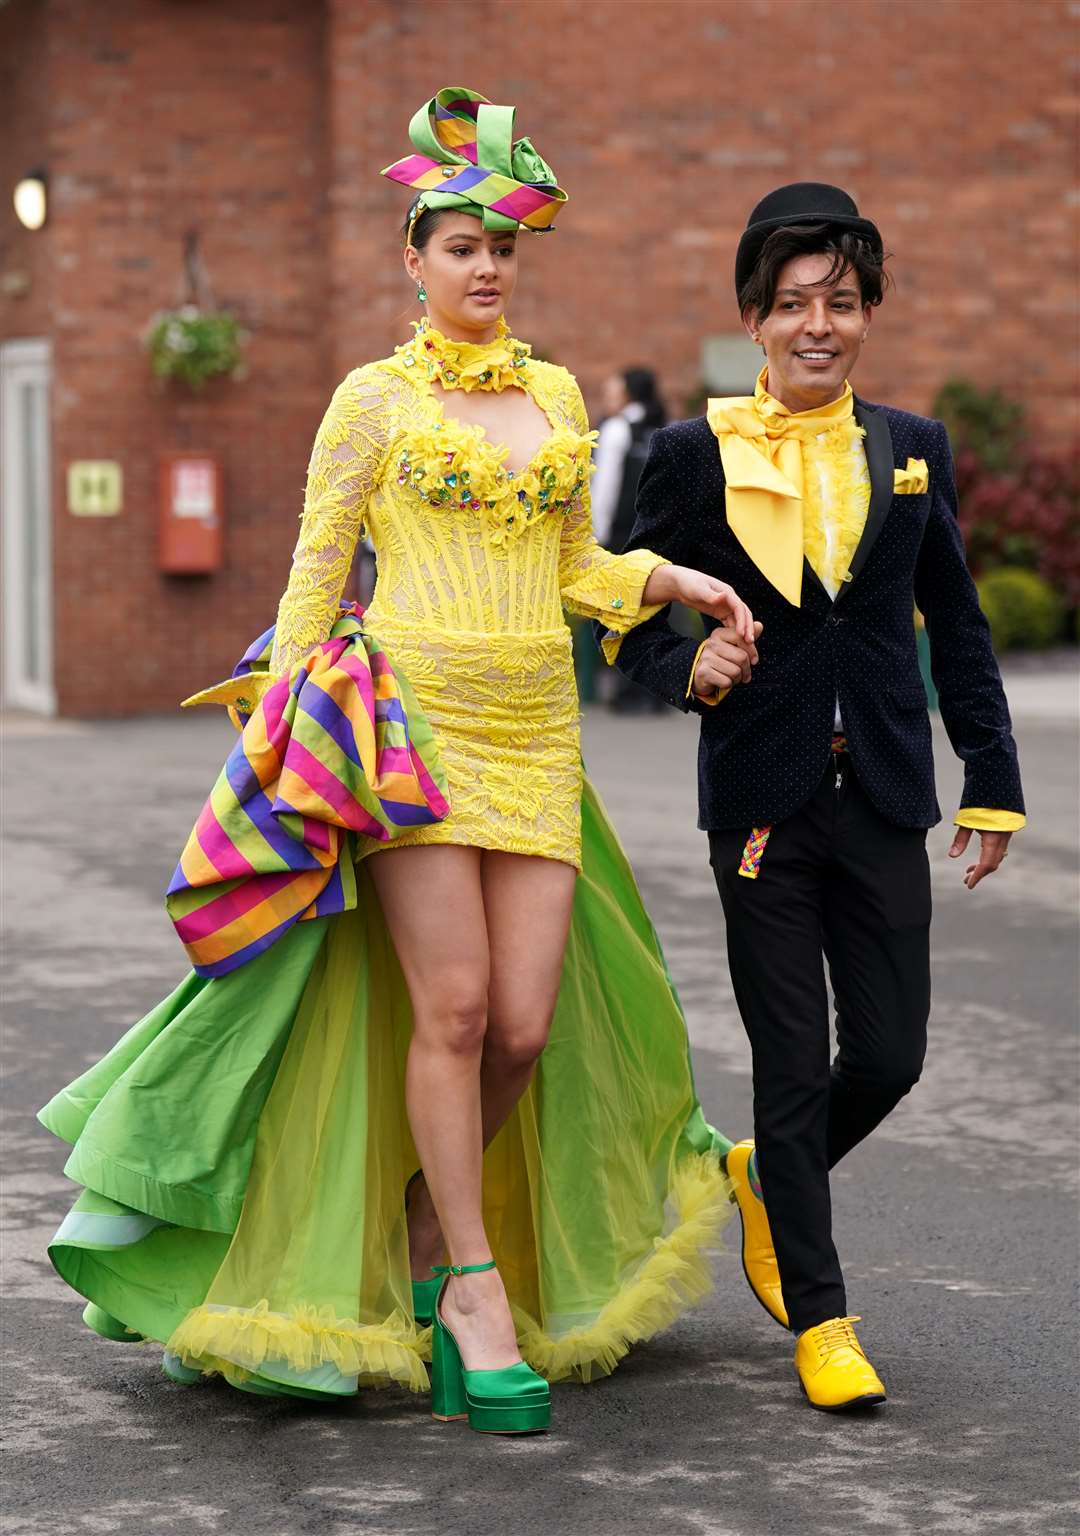 Evie Illes and Marcos Perez arrive at Aintree for Ladies Day (Tim Goode/PA)